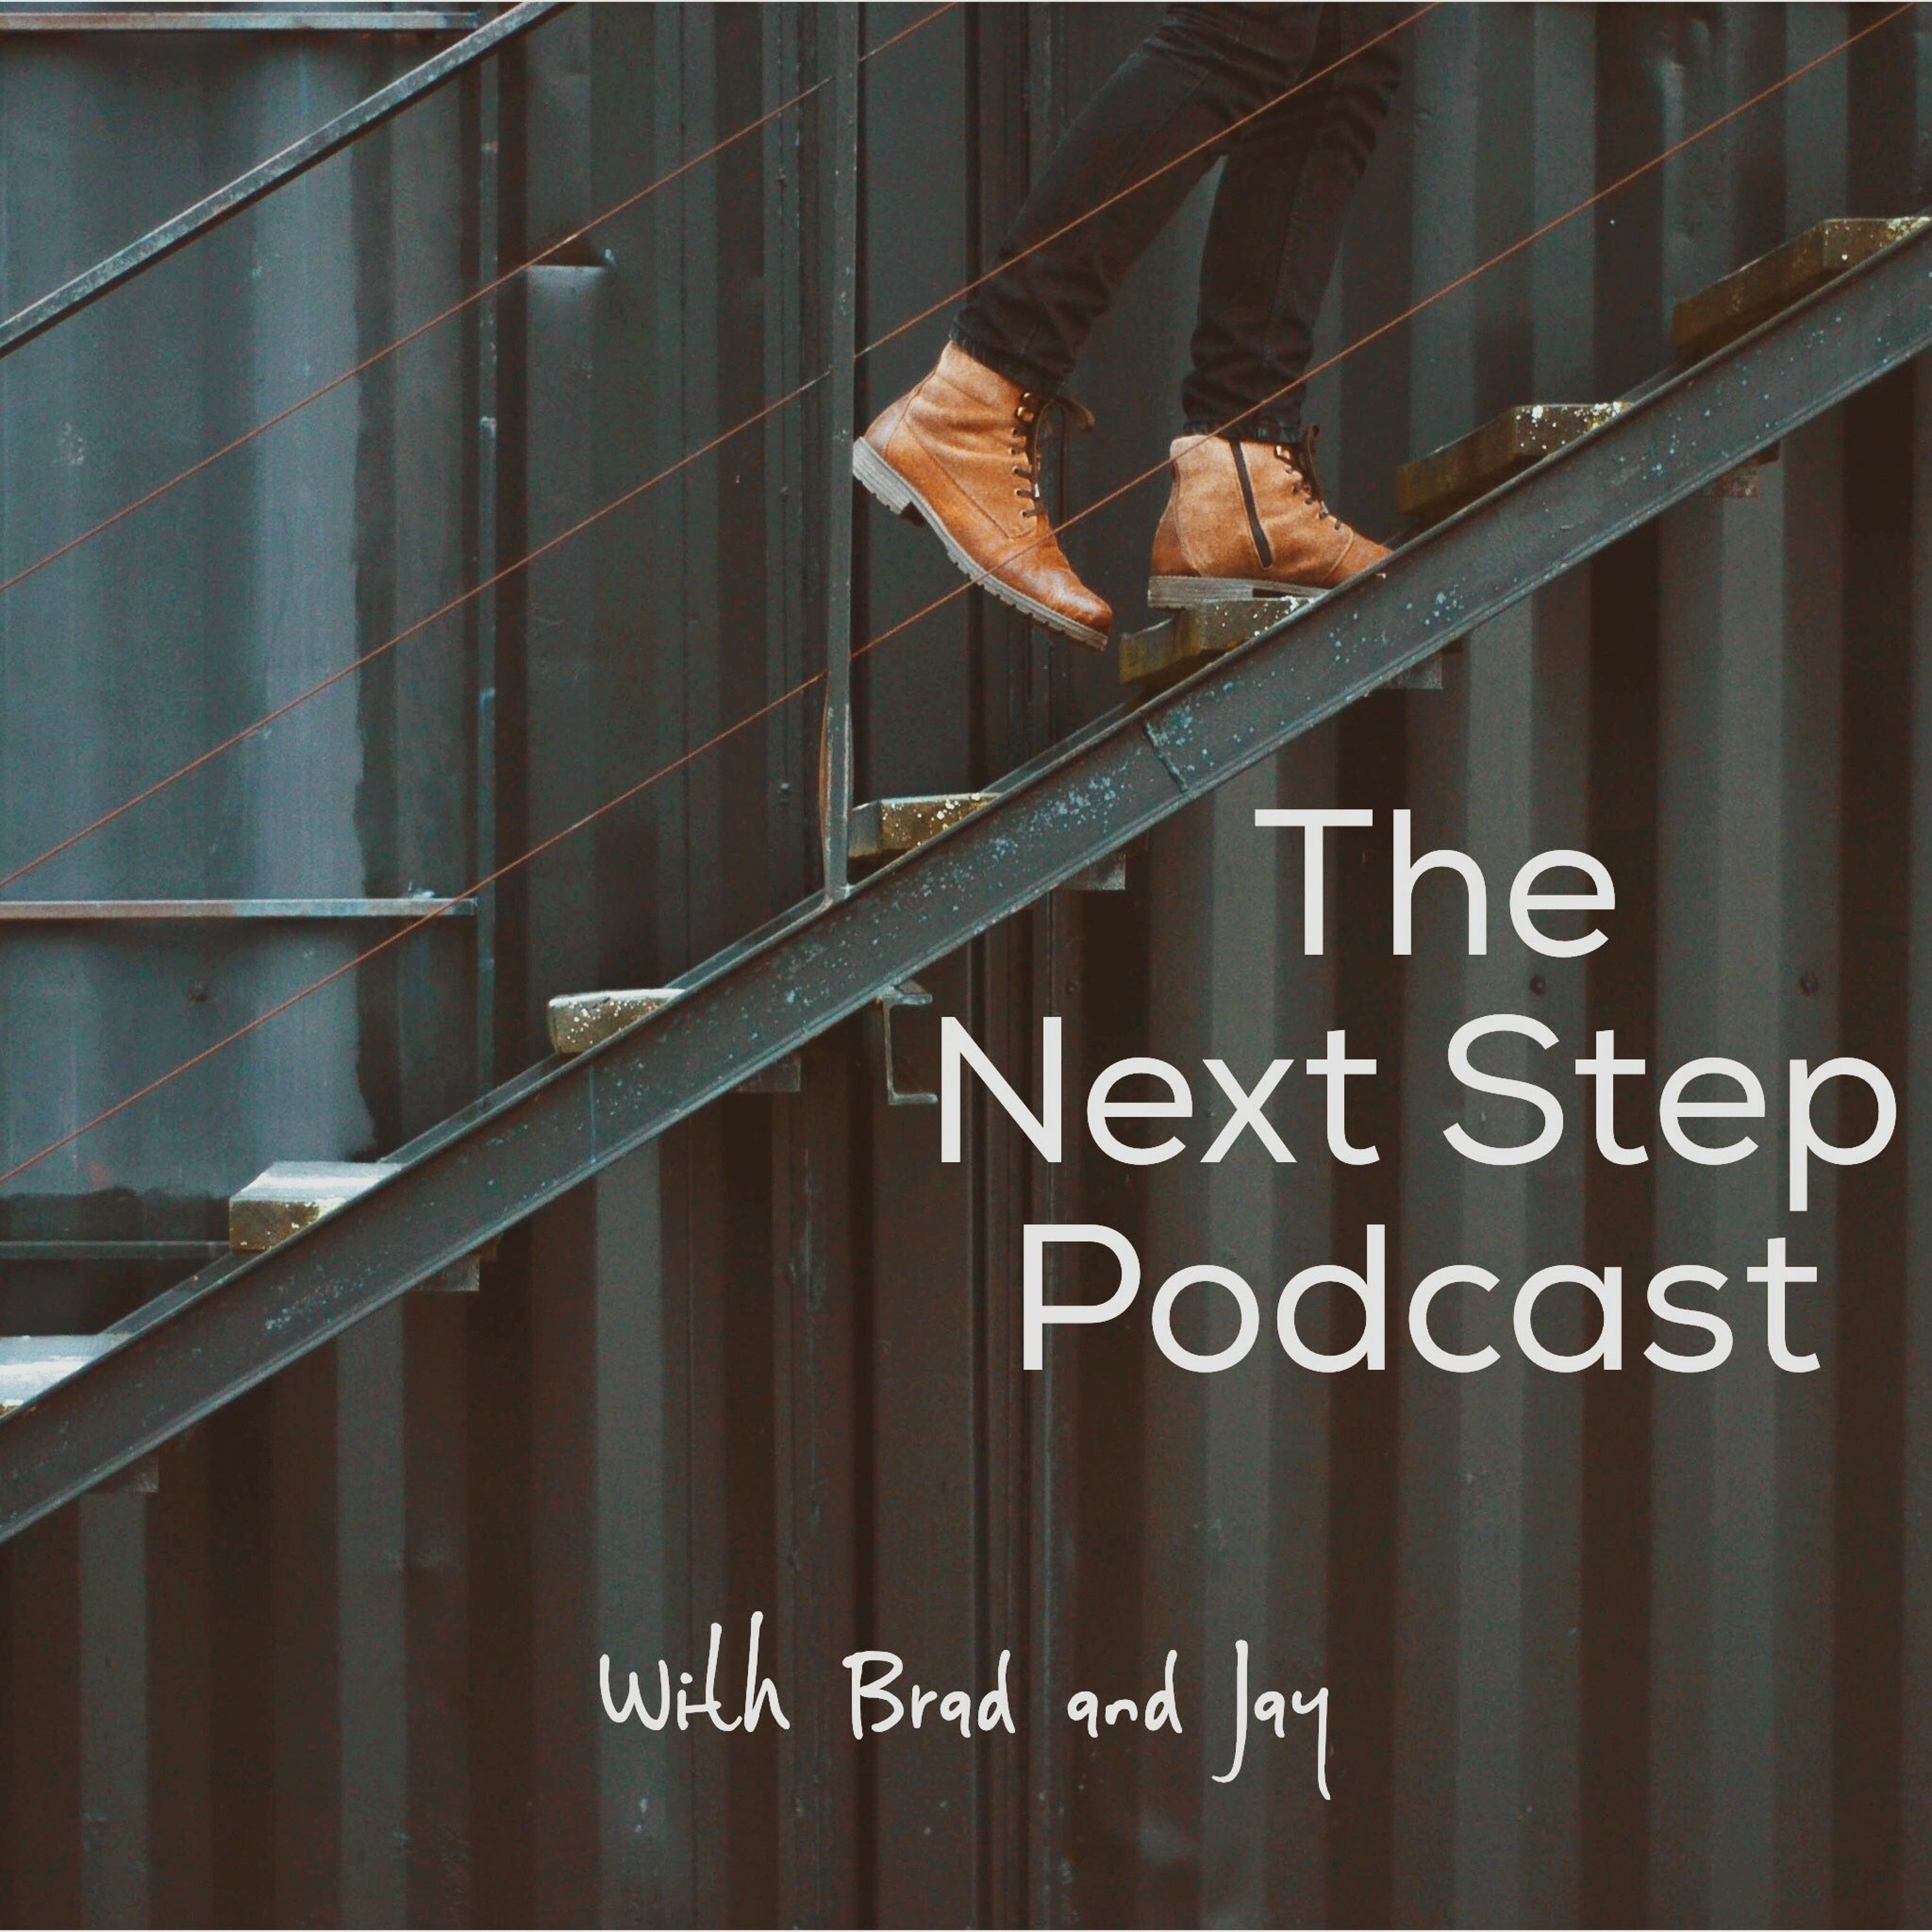 The Next Step Pod 5.12 Some church news and listener questions